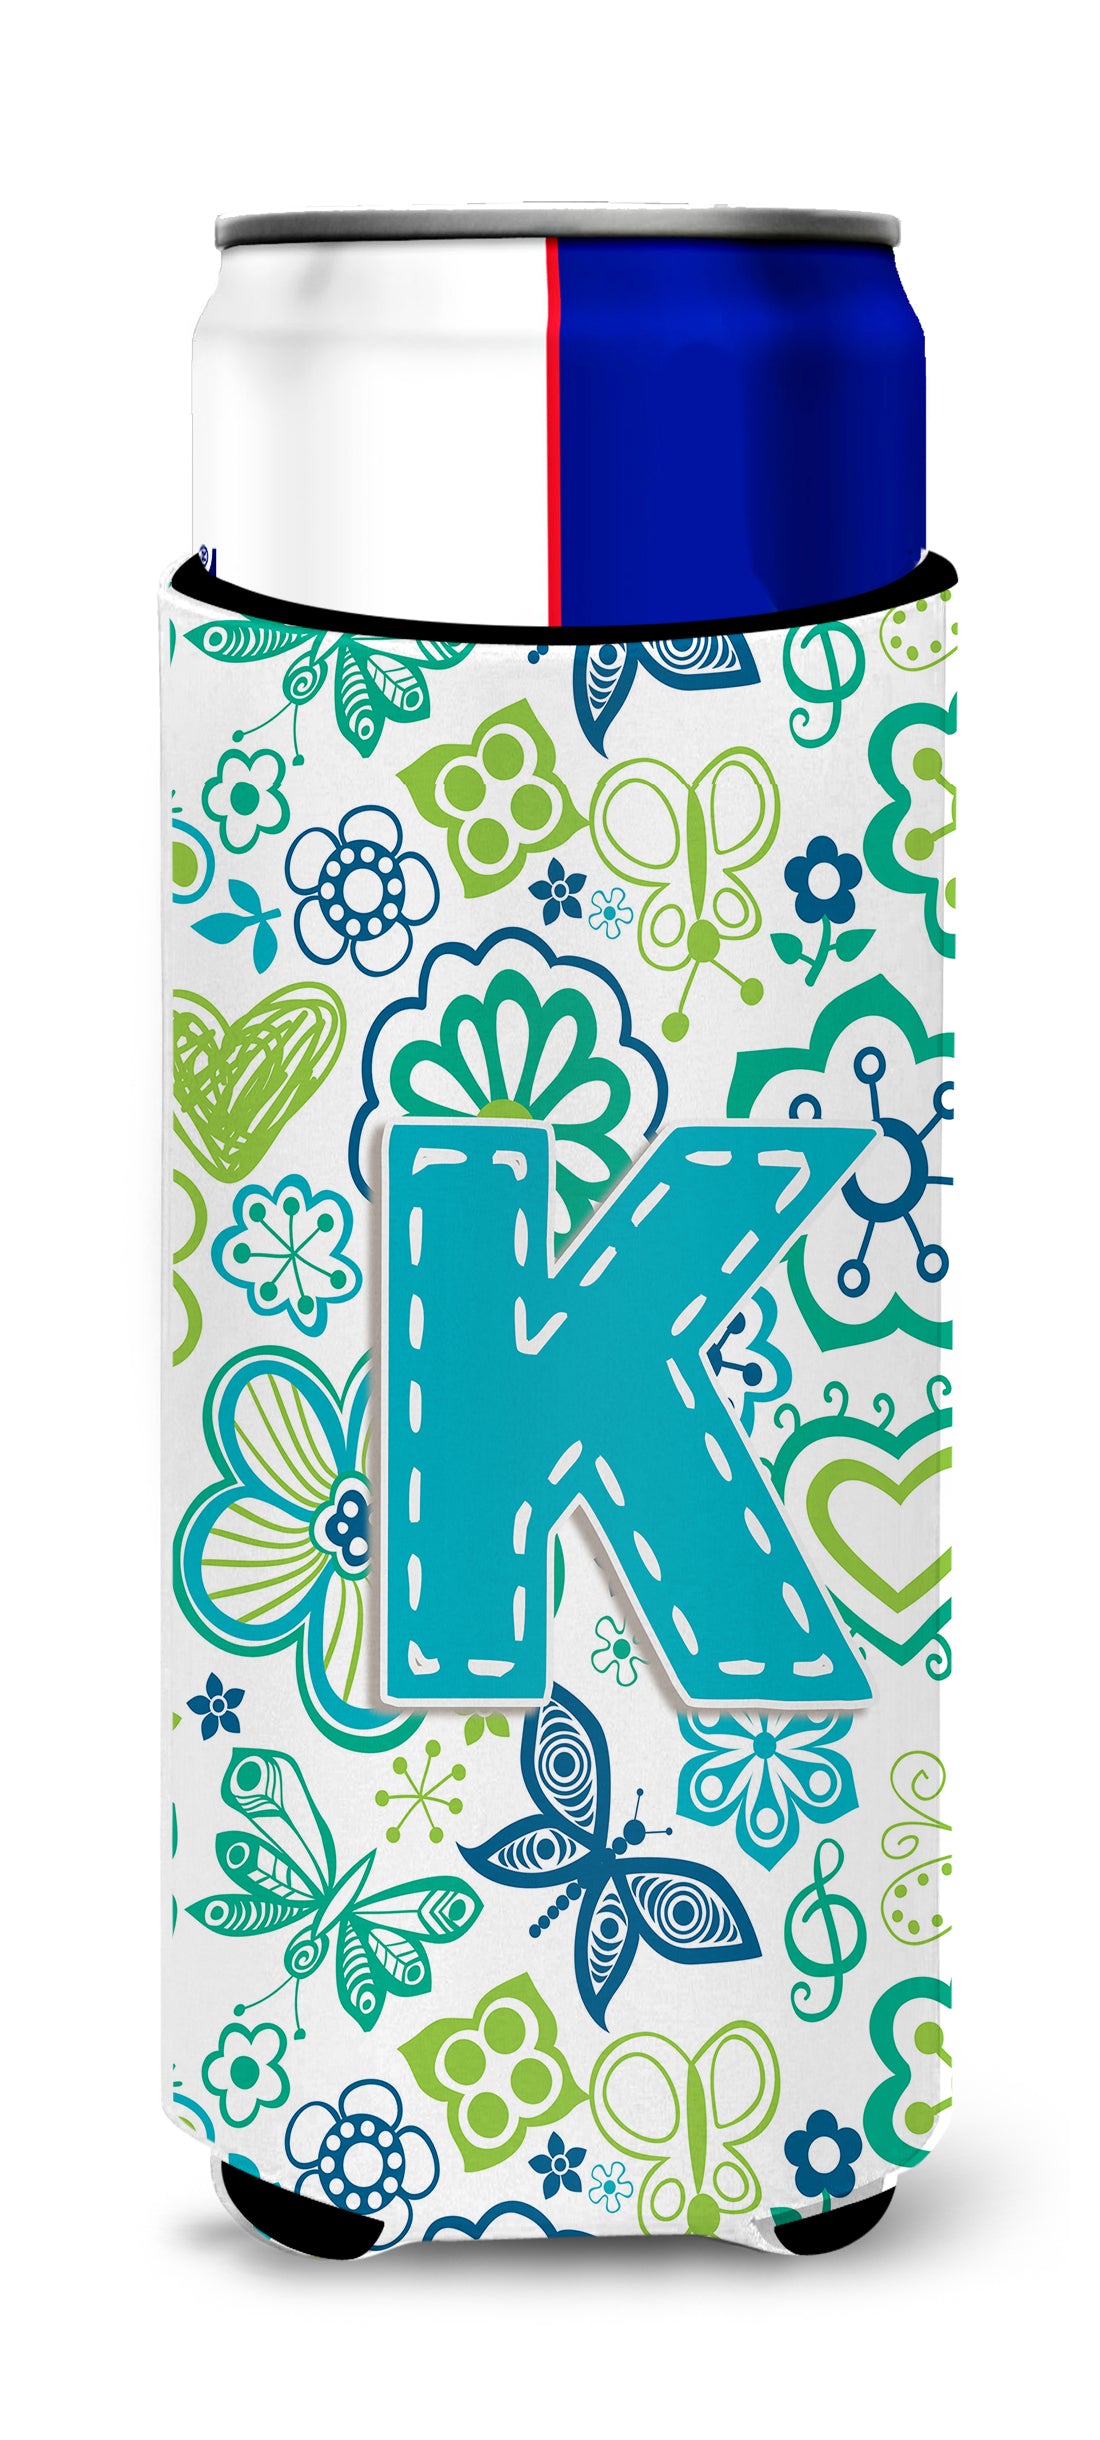 Letter K Flowers and Butterflies Teal Blue Ultra Beverage Insulators for slim cans CJ2006-KMUK.